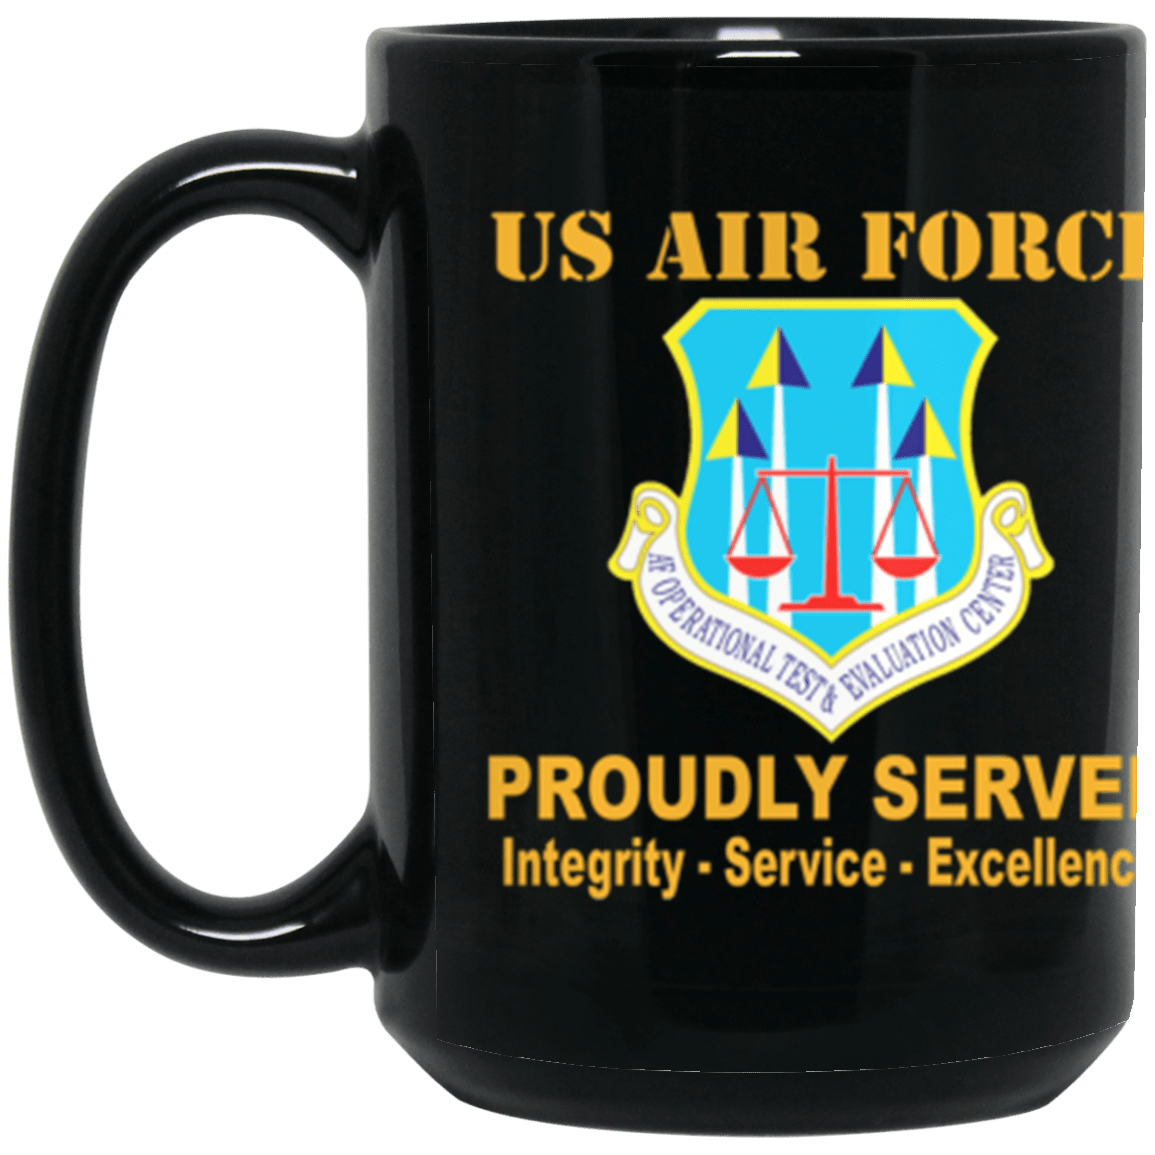 US Air Force Operational Test and Evaluation Center Proudly Served Core Values 15 oz. Black Mug-Drinkware-Veterans Nation